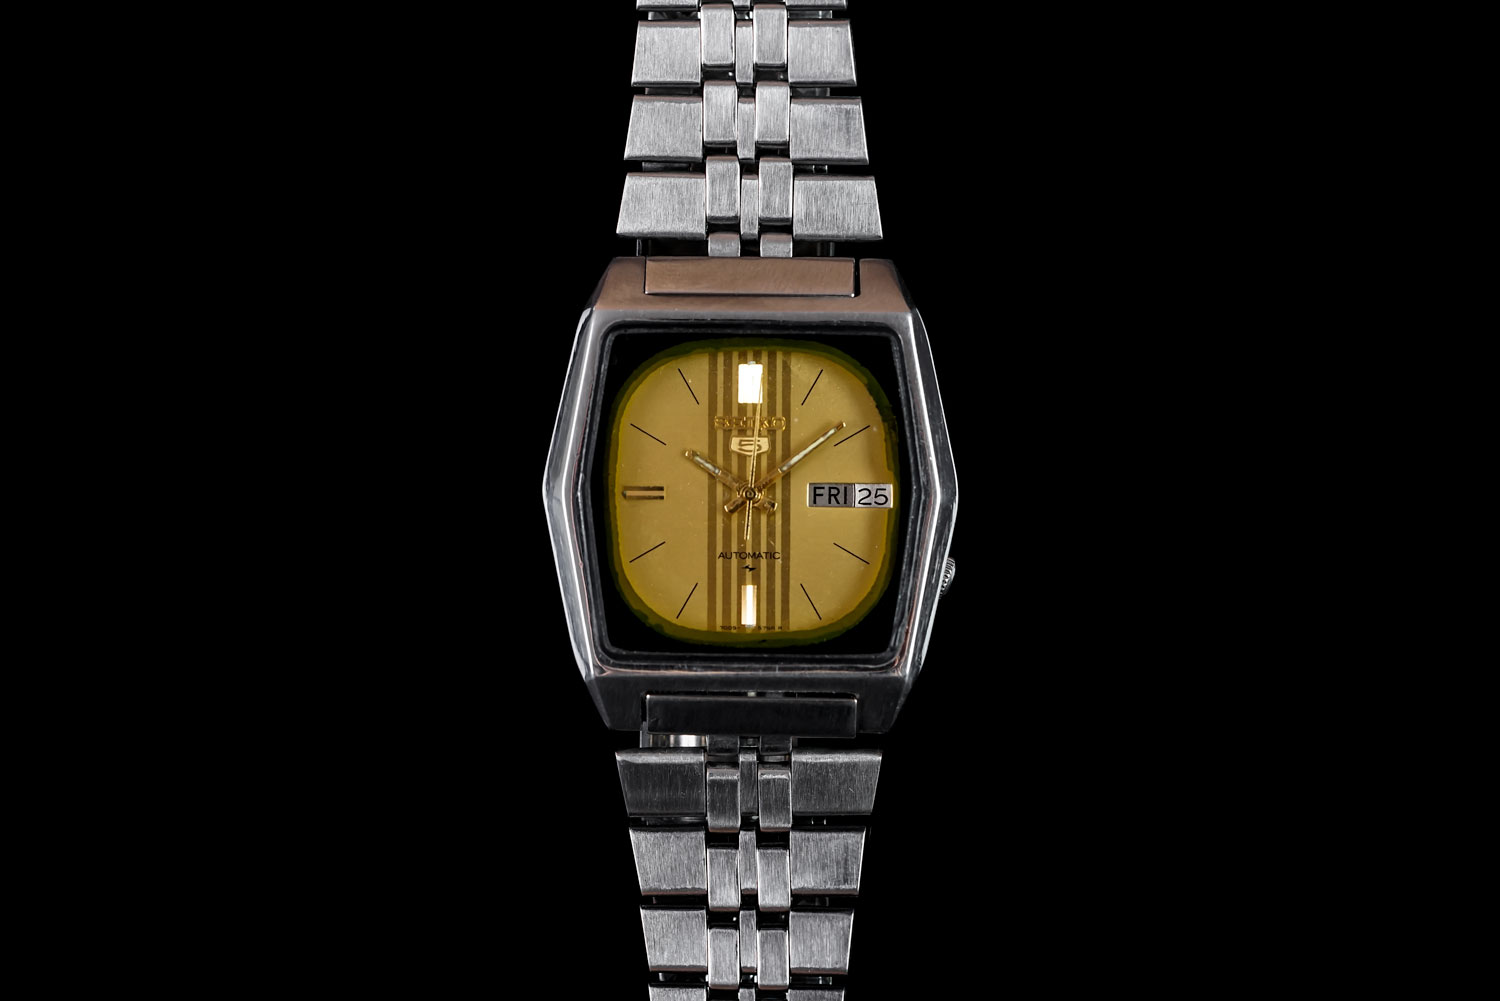 GENTLEMEN'S SEIKO VINTAGE WRISTWATCH REF 7009-5560, champagne dial with hour markers, day and date